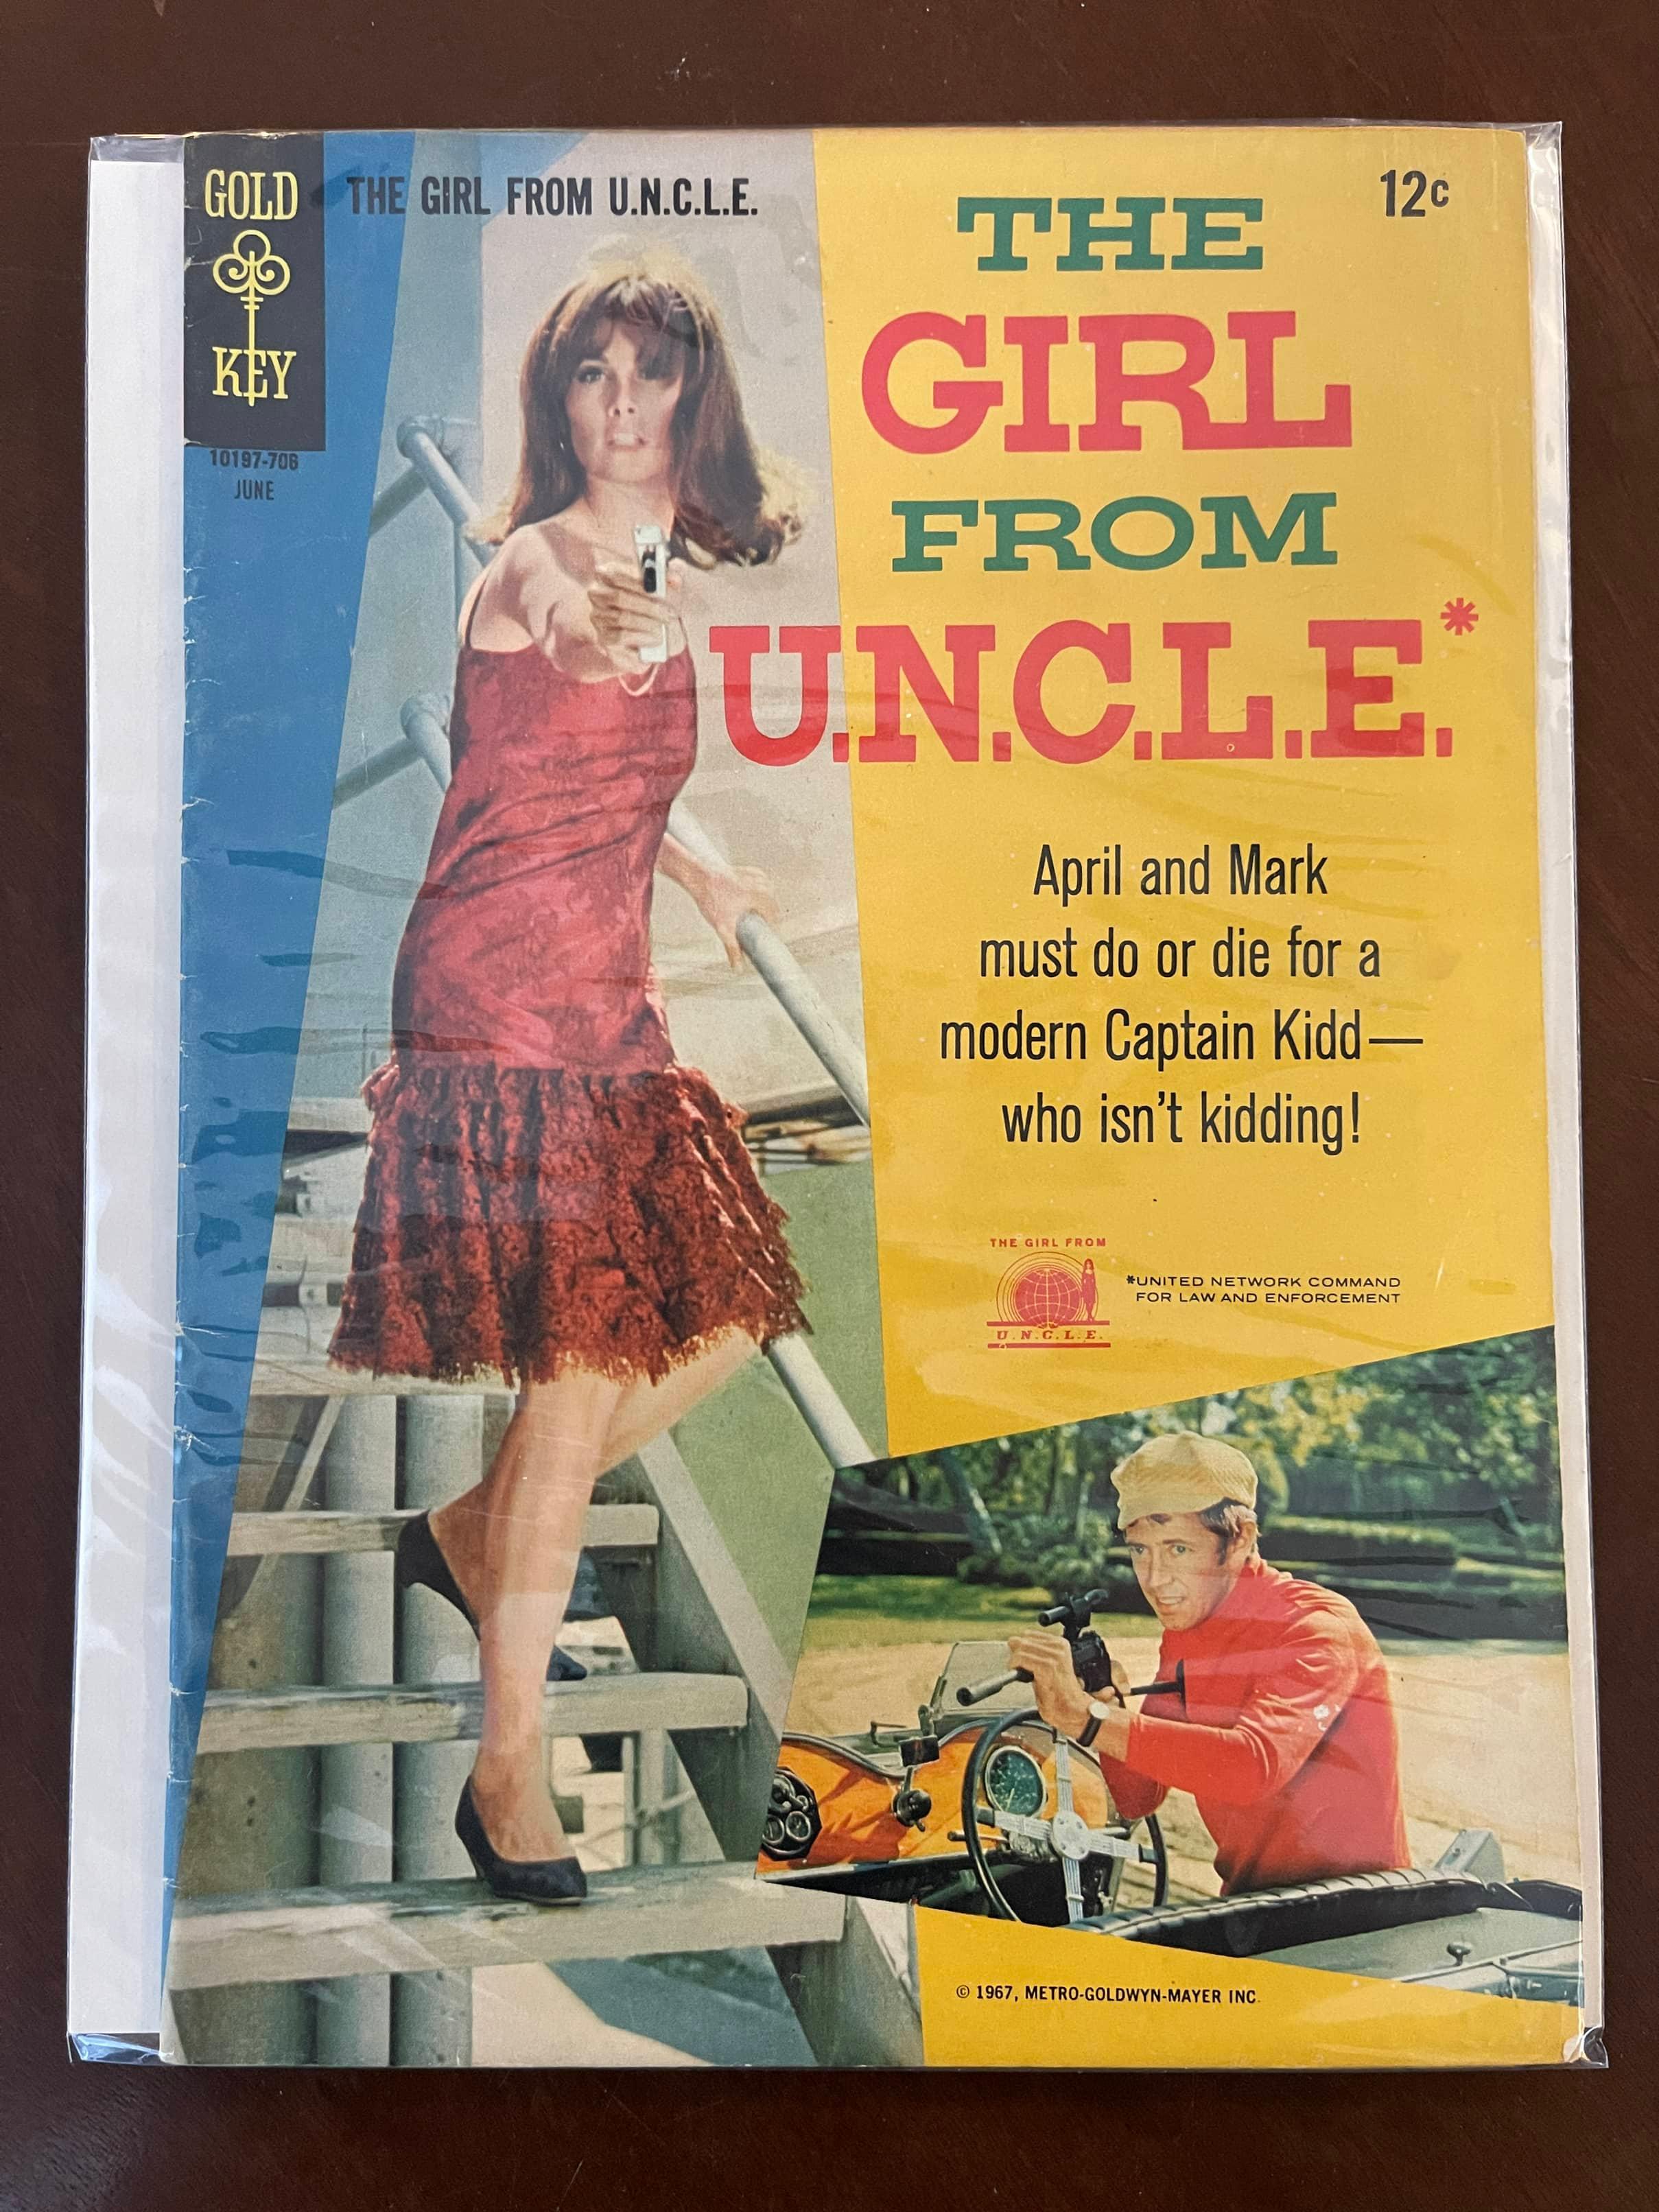 The Girl From UNCLE Comic #3 Gold Key 1967 Silver Age TV Show Comic 12 Cents